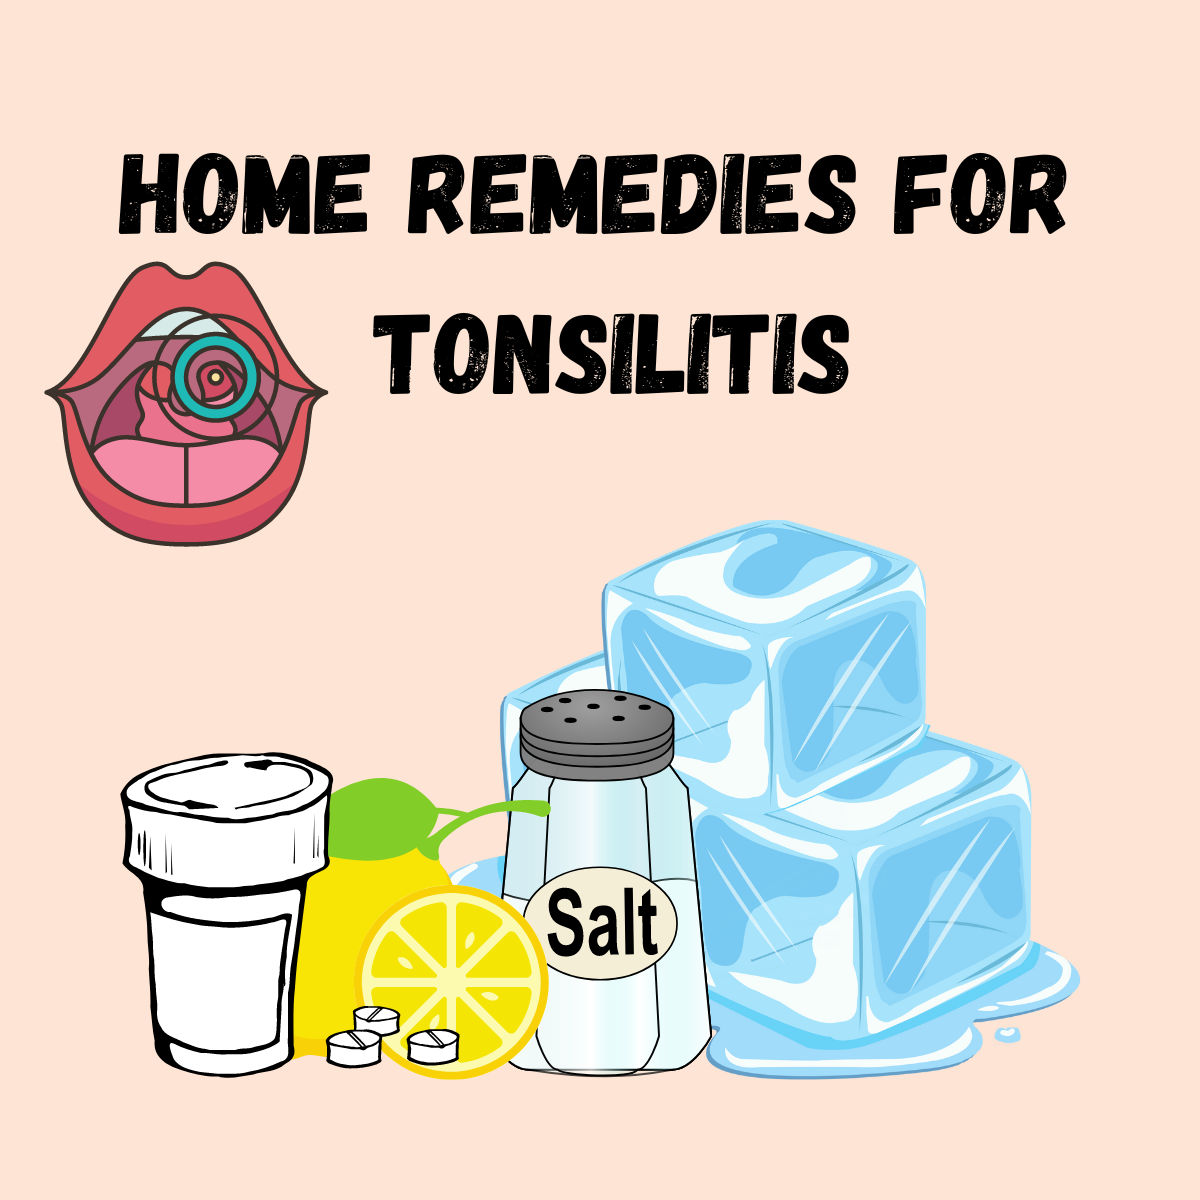 Home remedies for tonsillitis